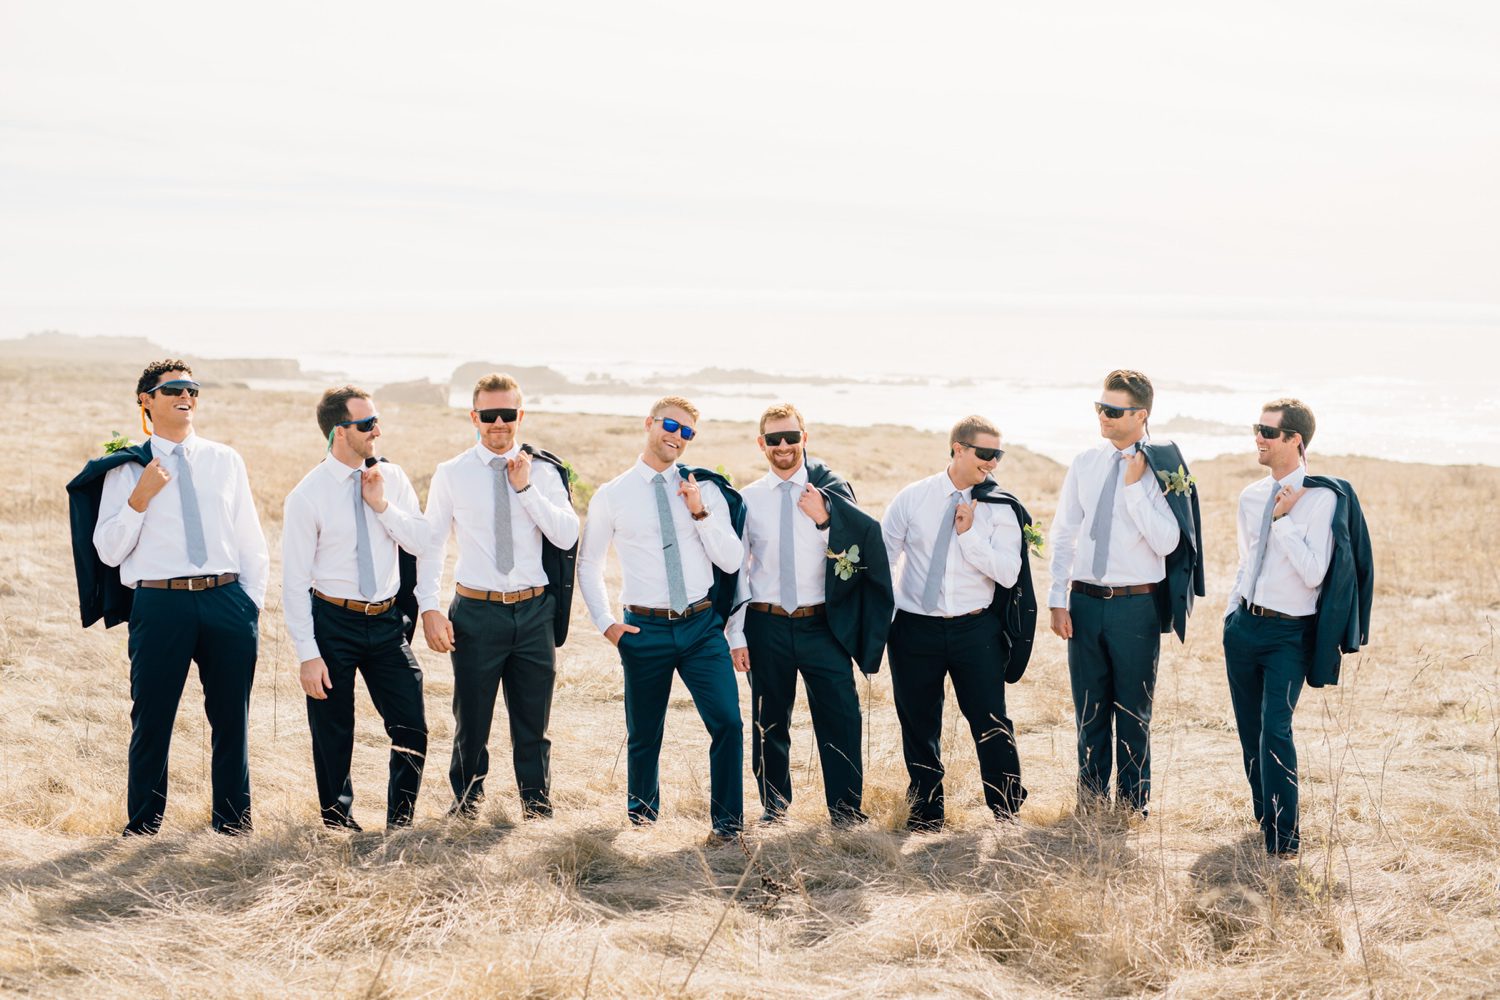 Groomsmen and Groom draping their suit coats over their shoulder with sunglasses